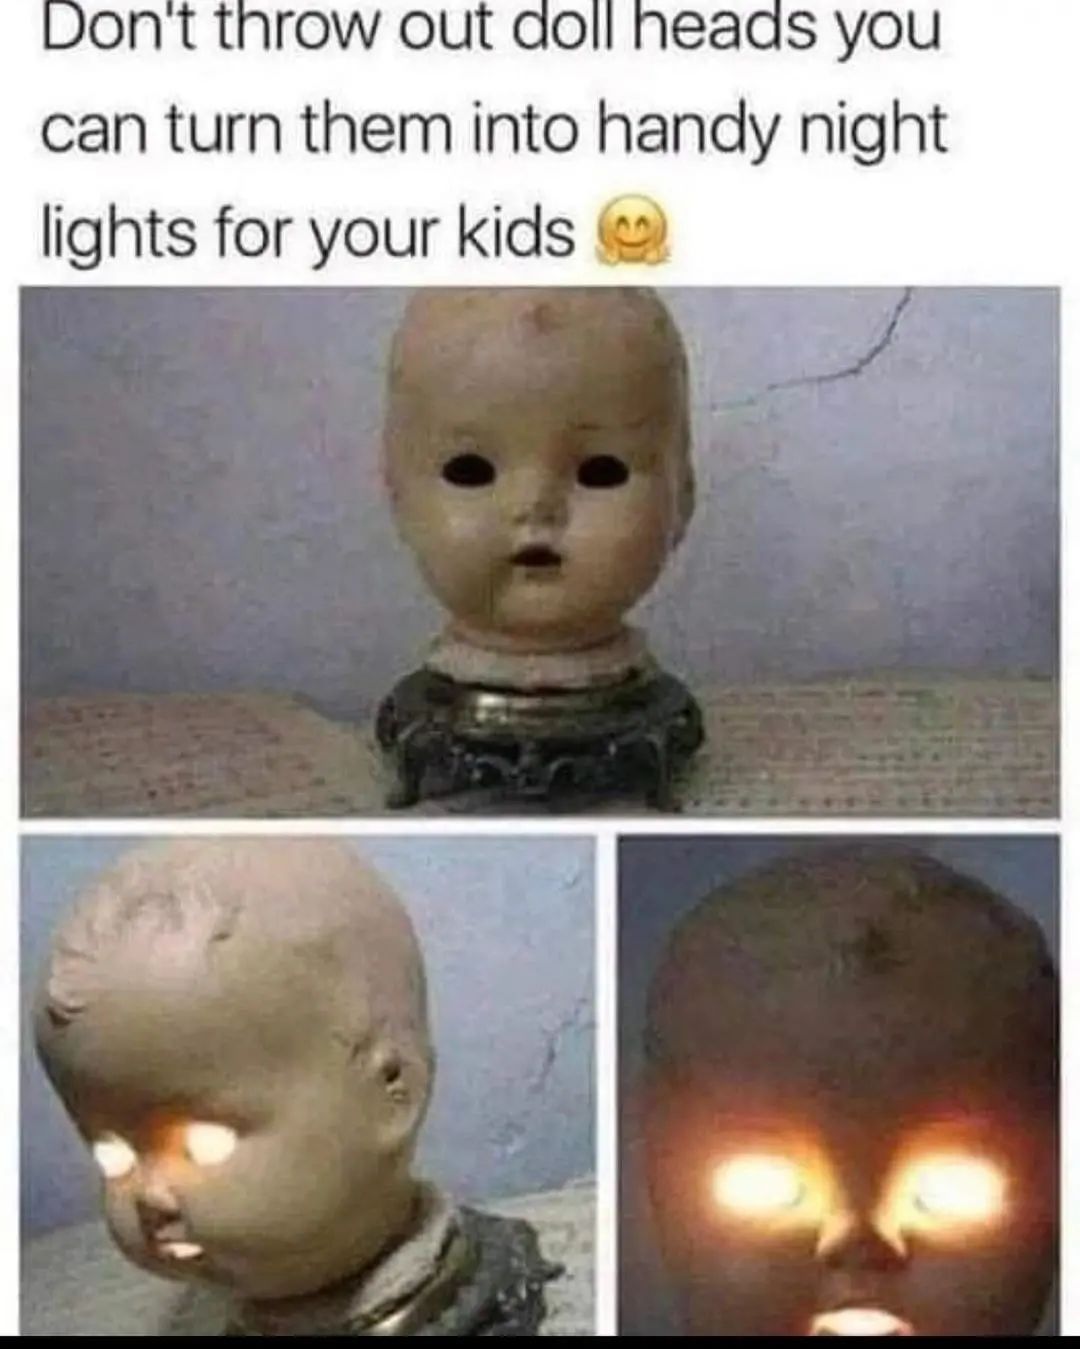 Don't throw out doll heads you can turn them into handy night lights for your kids.